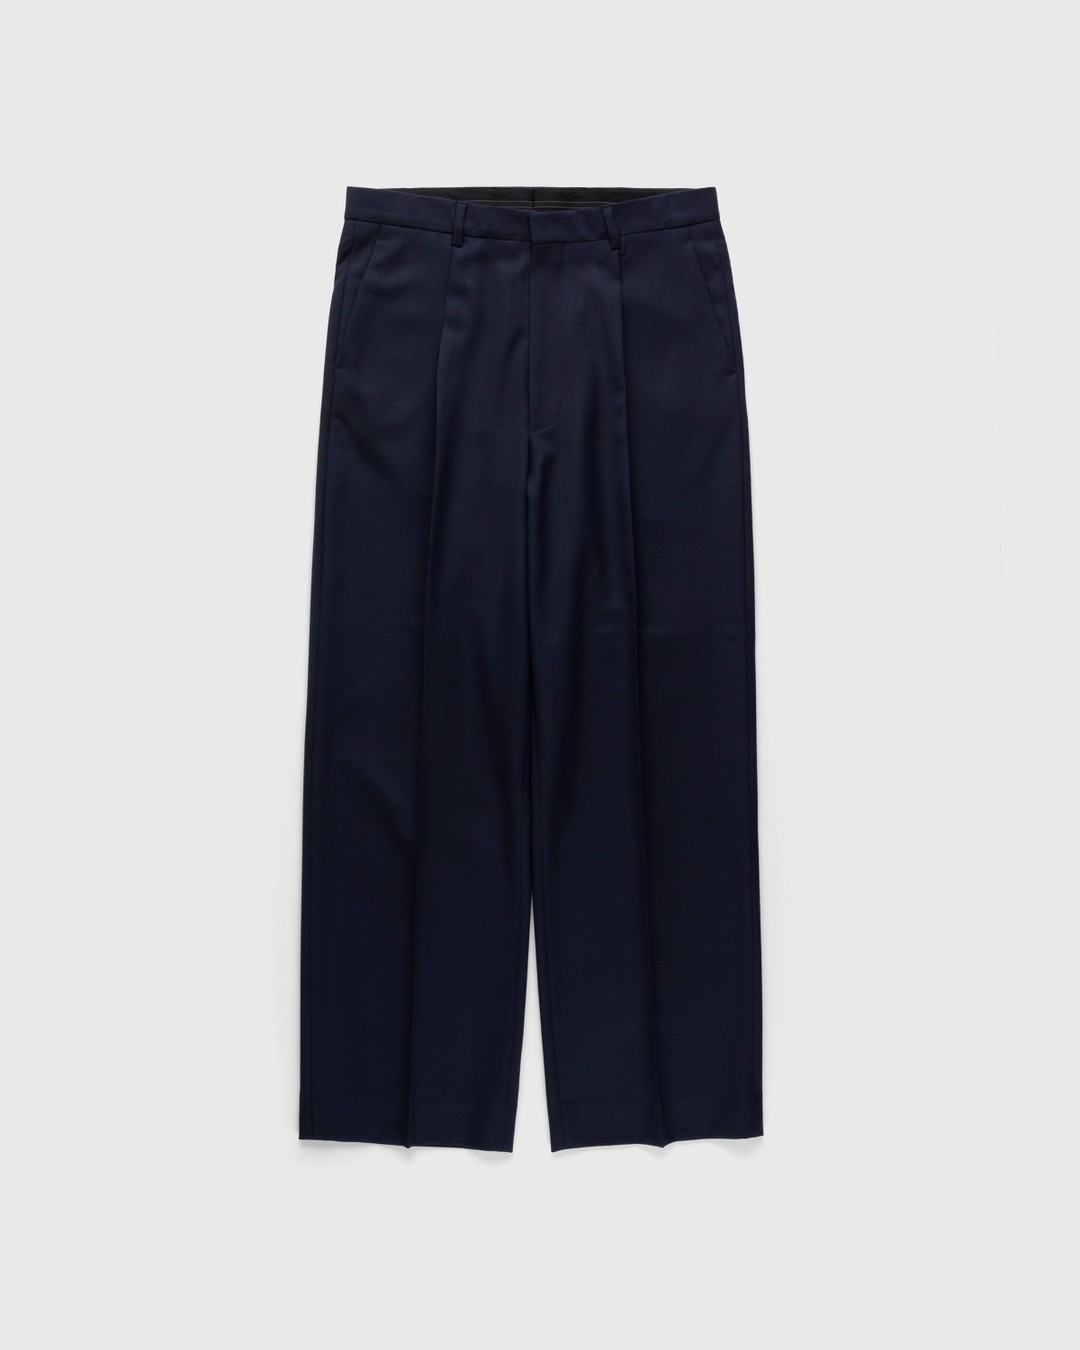 Highsnobiety – Wool Dress Pant Navy - Trousers - Blue - Image 1